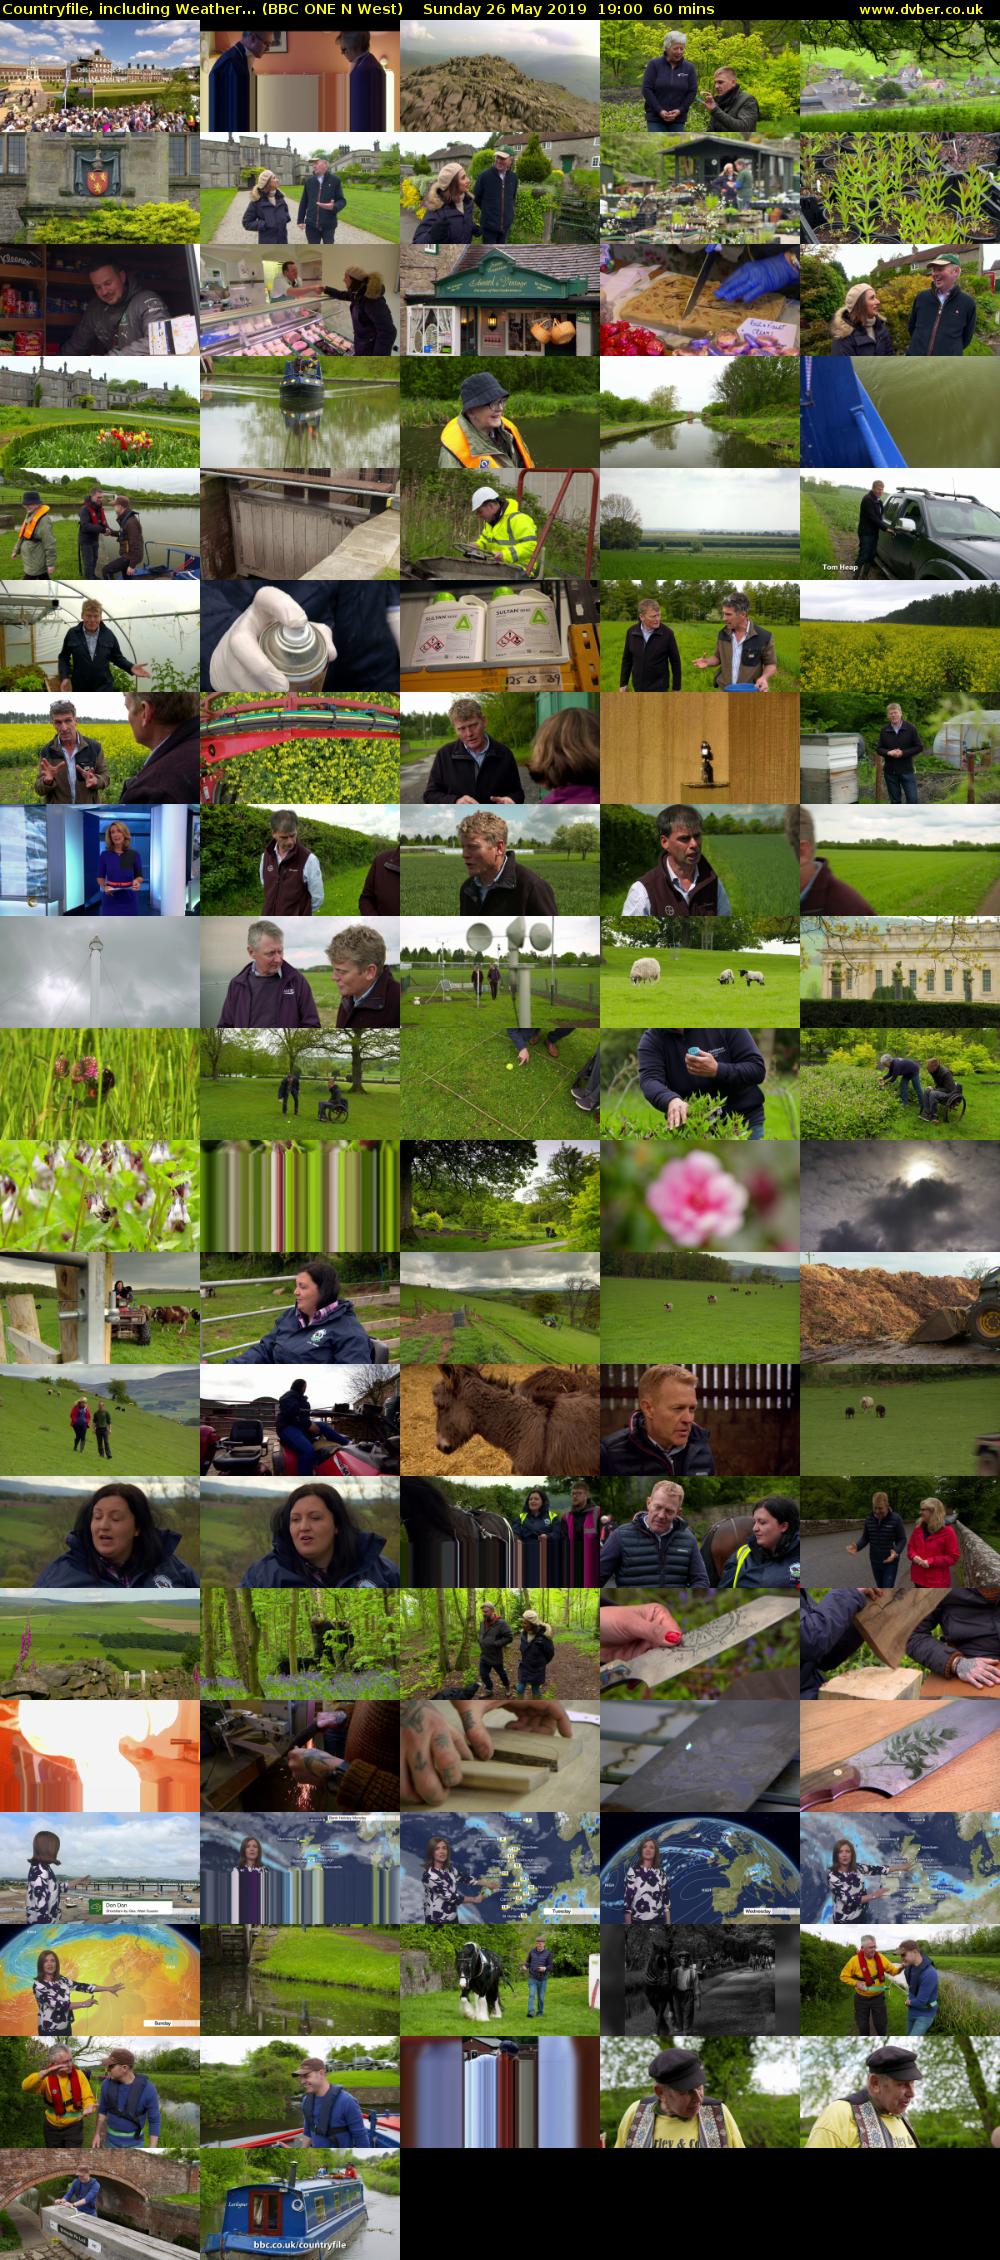 Countryfile, including Weather... (BBC ONE N West) Sunday 26 May 2019 19:00 - 20:00